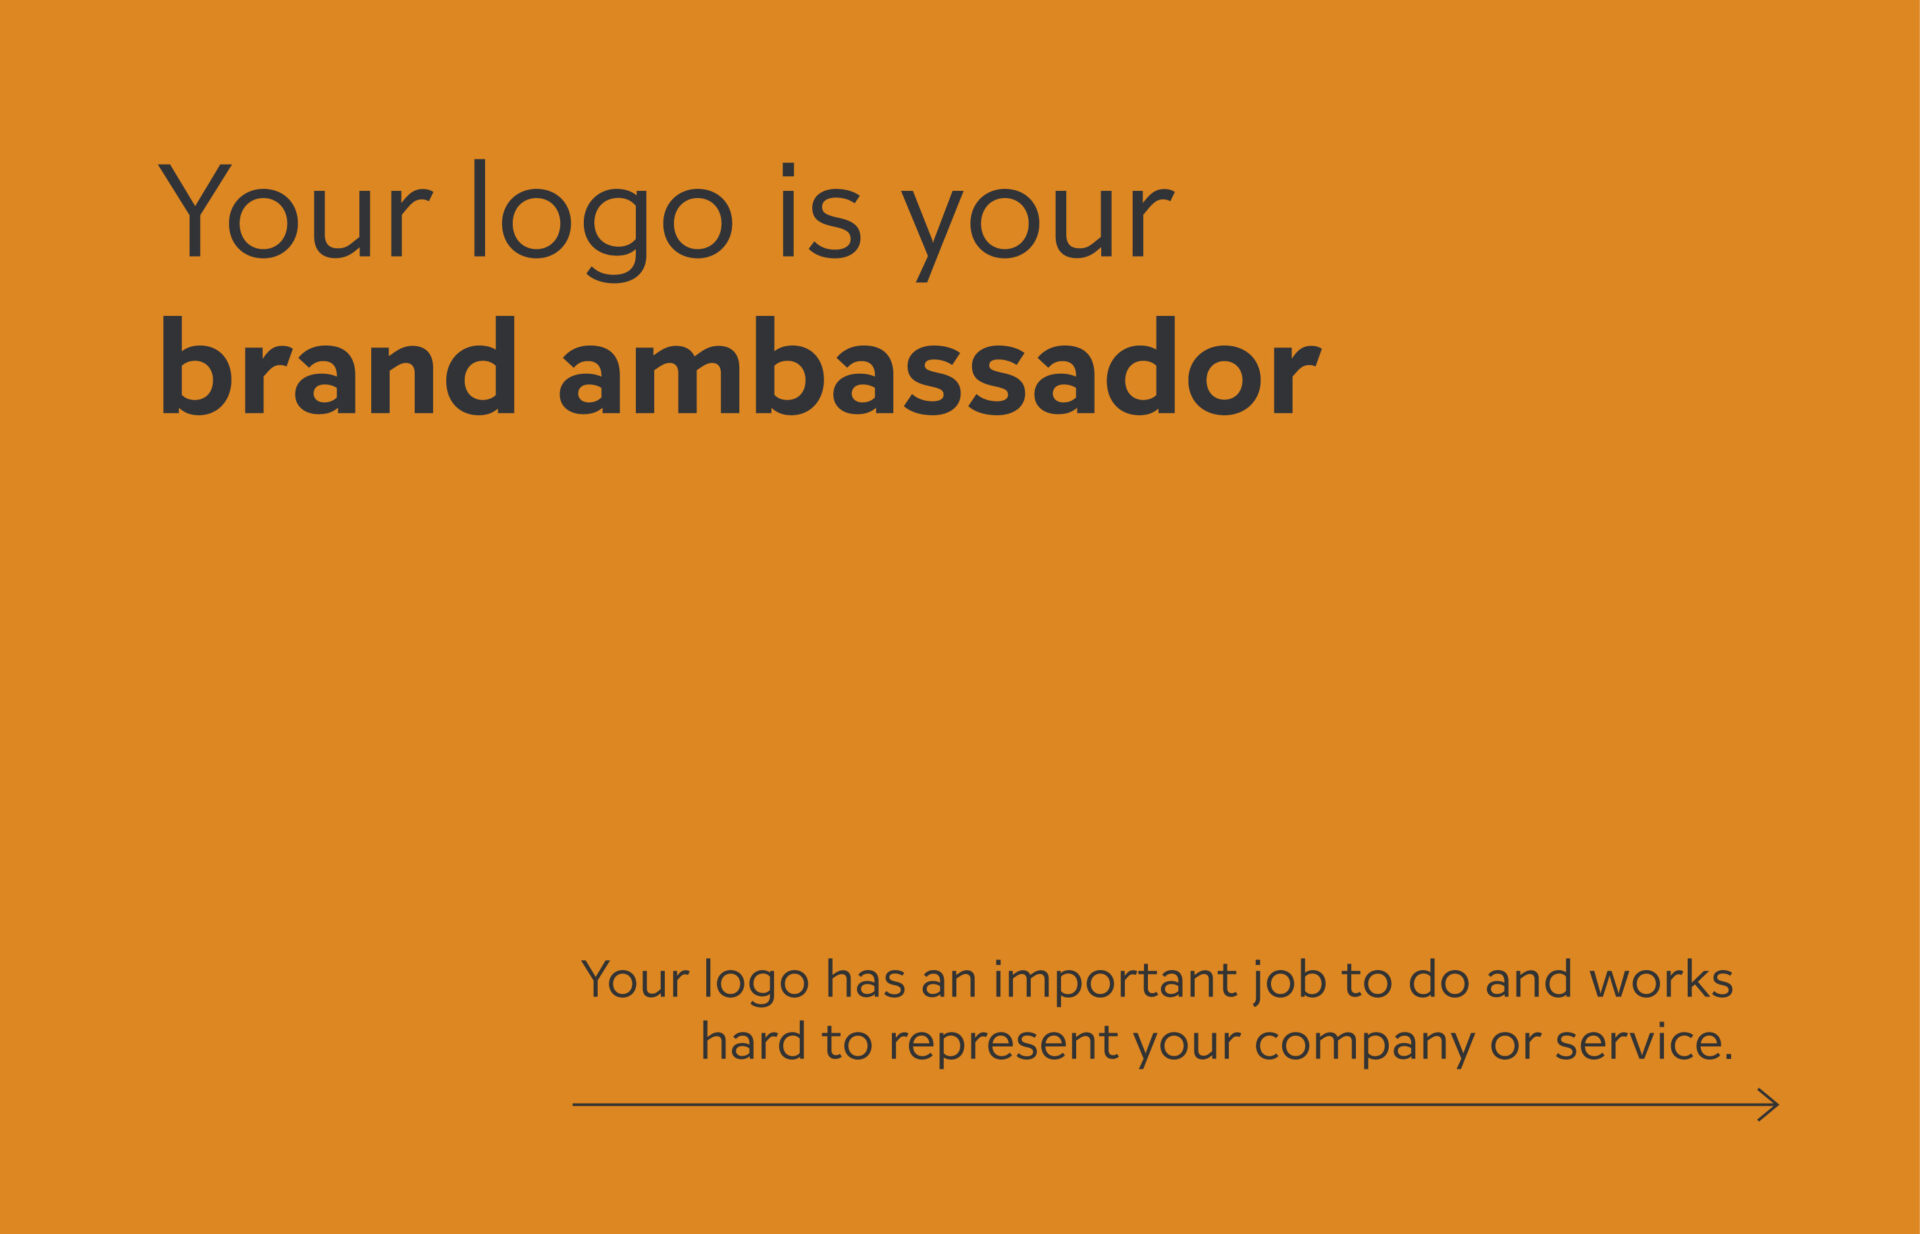 Your logo is your ambassador